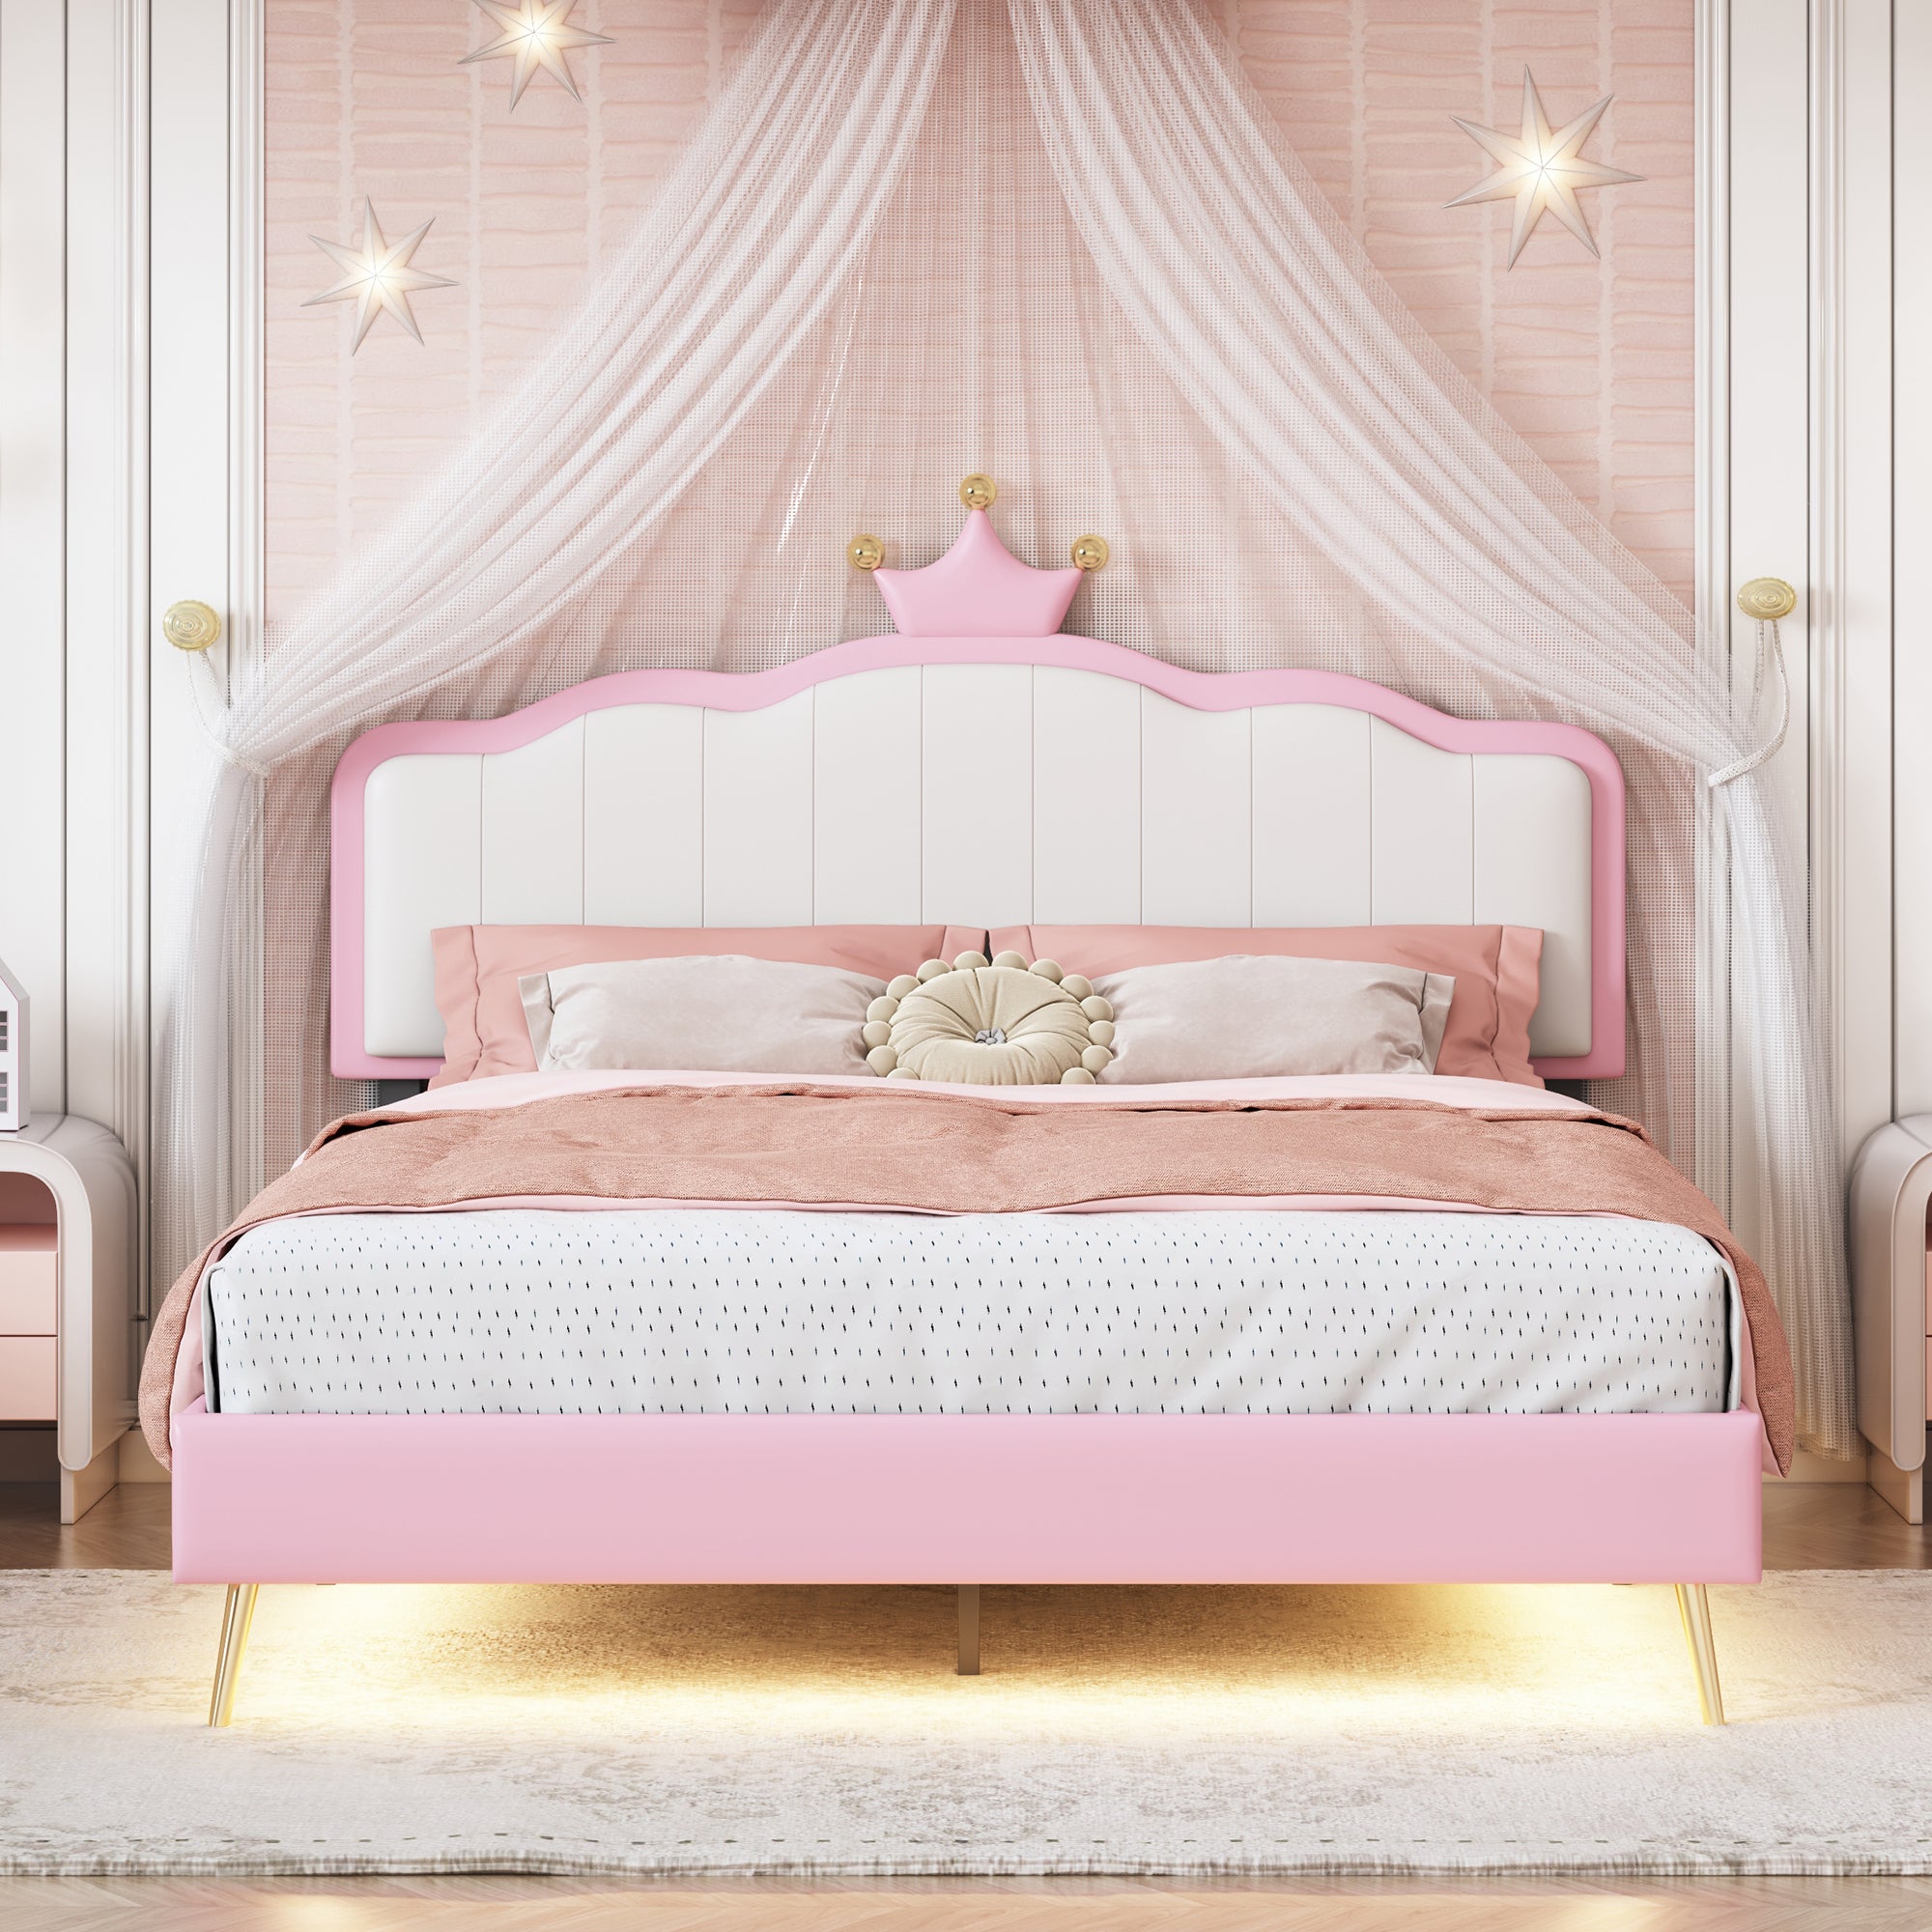 🆓🚛 Full Size Upholstered Princess Bed With Crown Headboard, Full Size Platform Bed With Headboard and Footboard With Light Strips, Golden Metal Legs, White+Pink